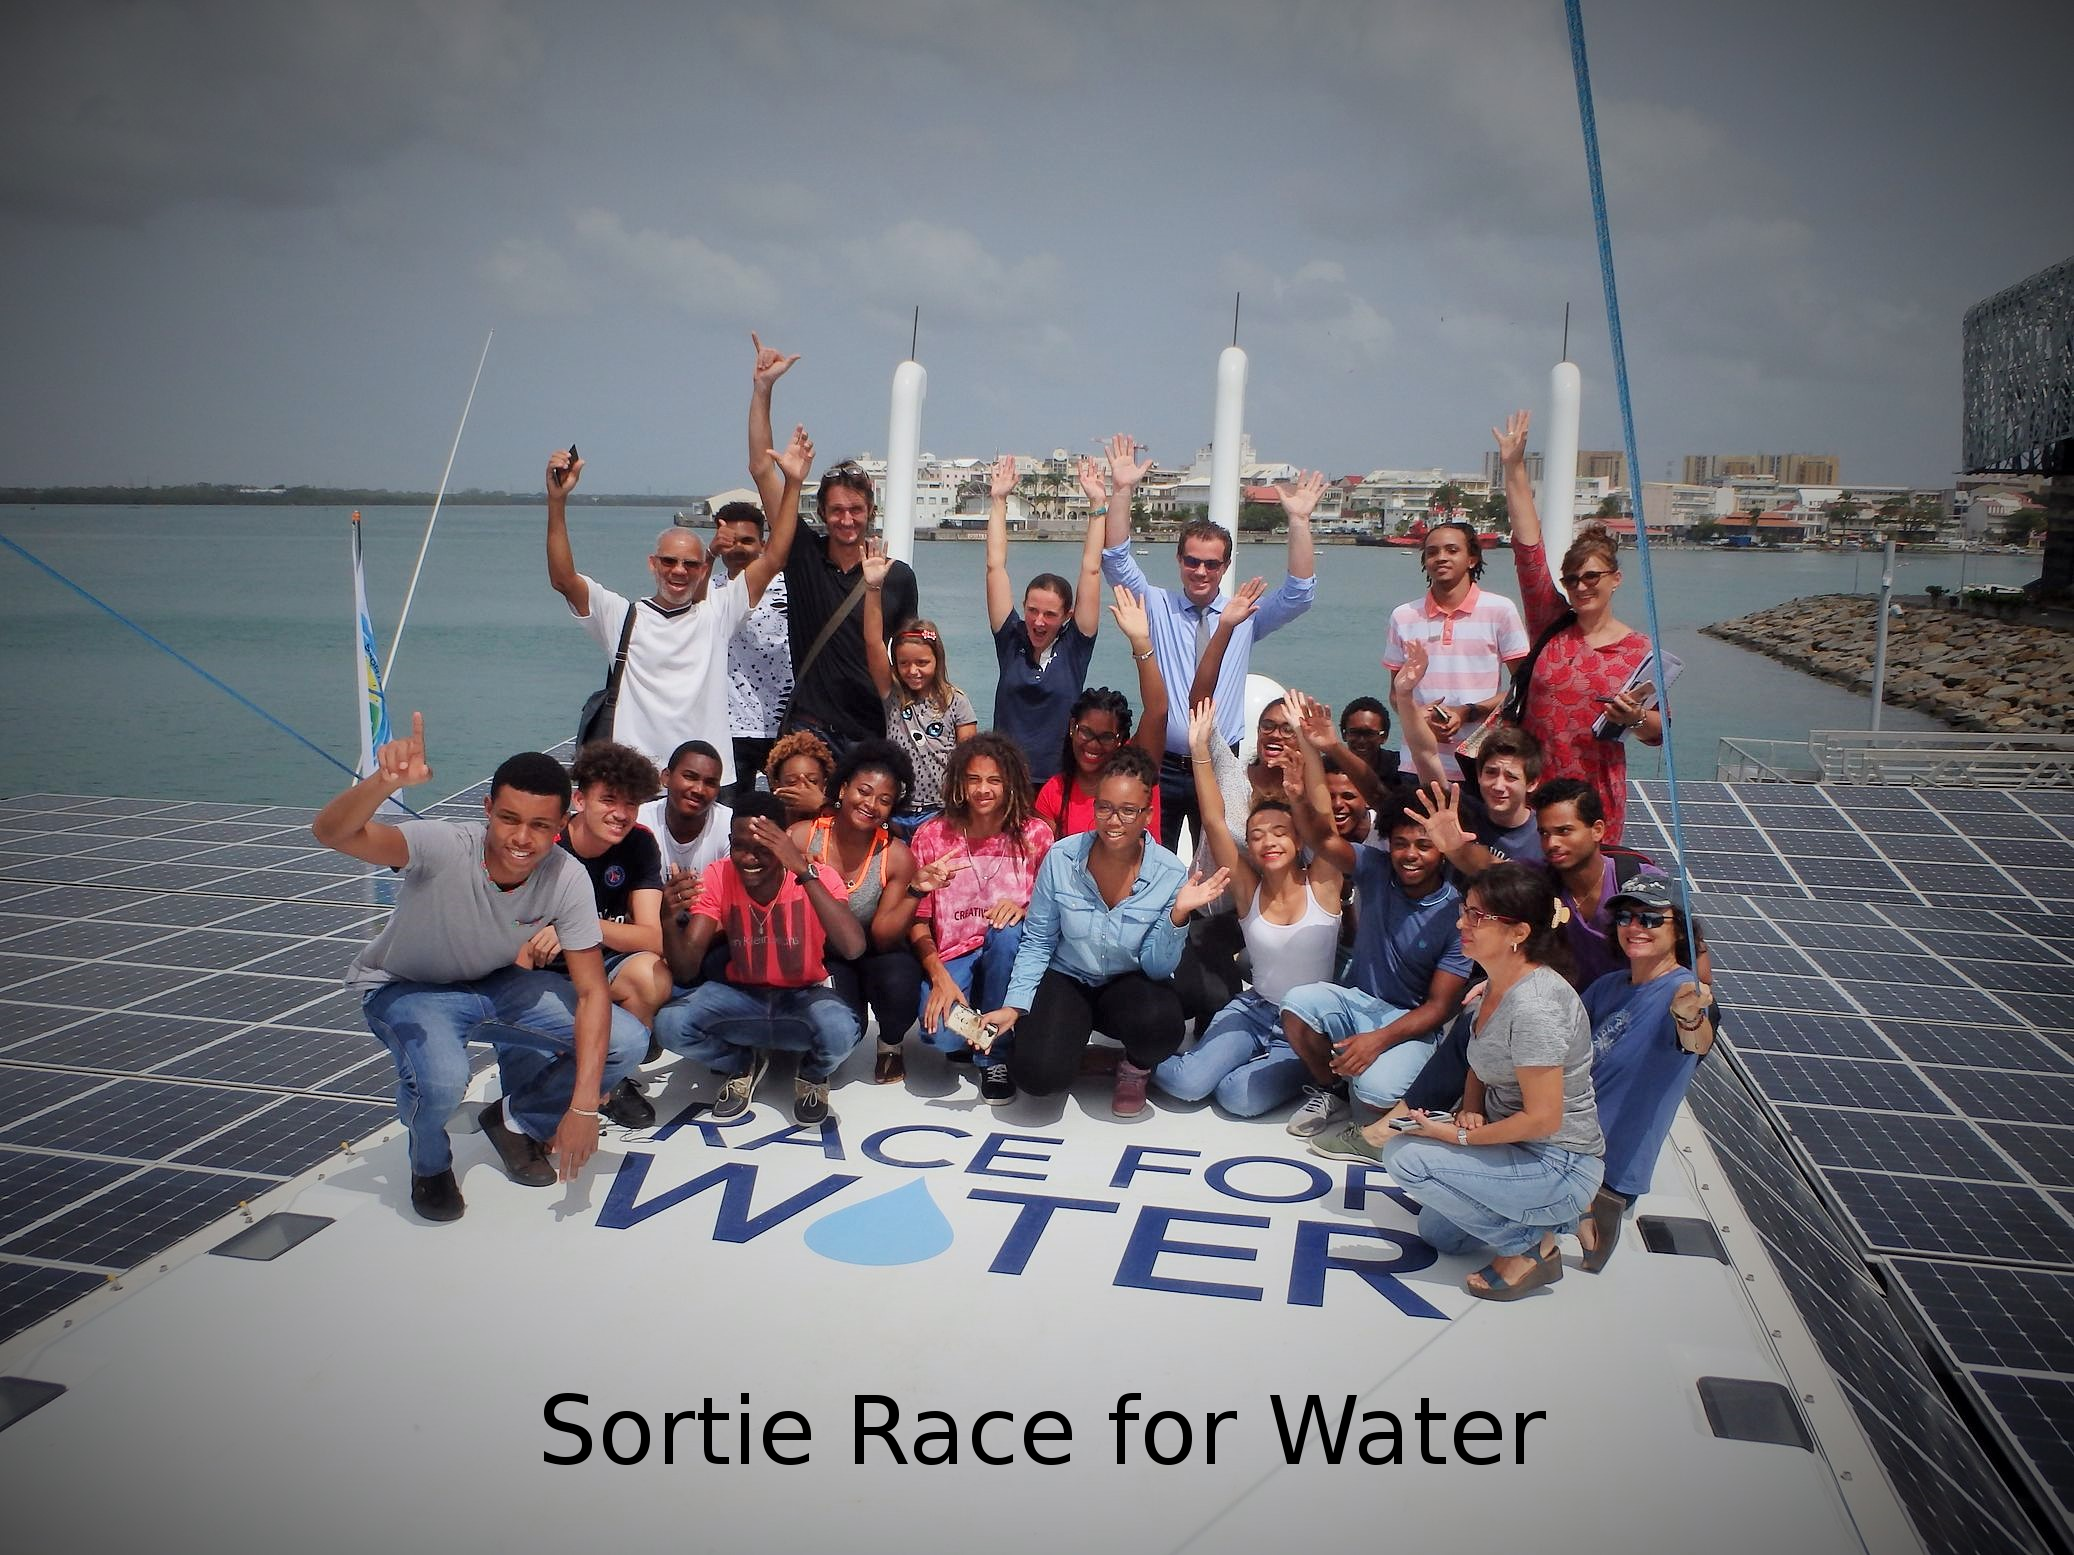 Race for Water